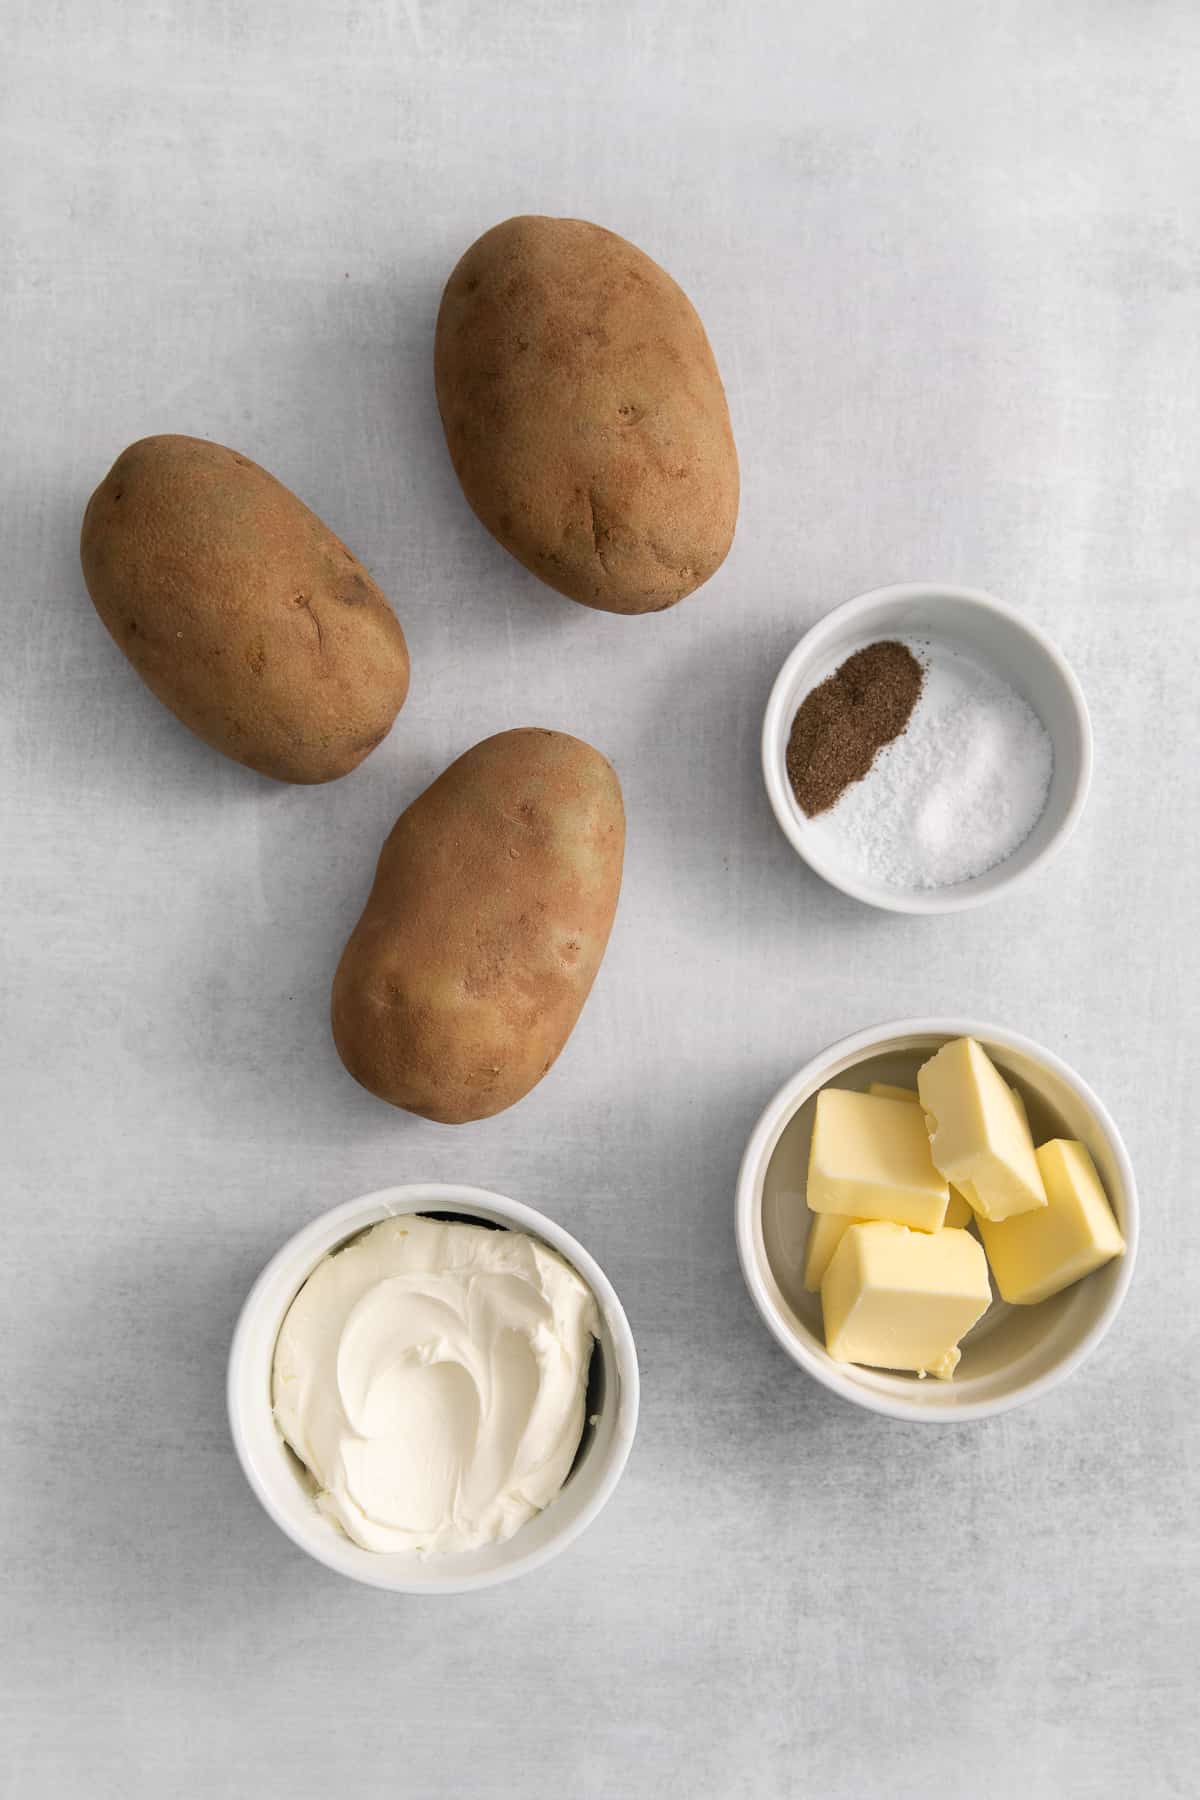 Ingredients for cream cheese mashed potatoes.